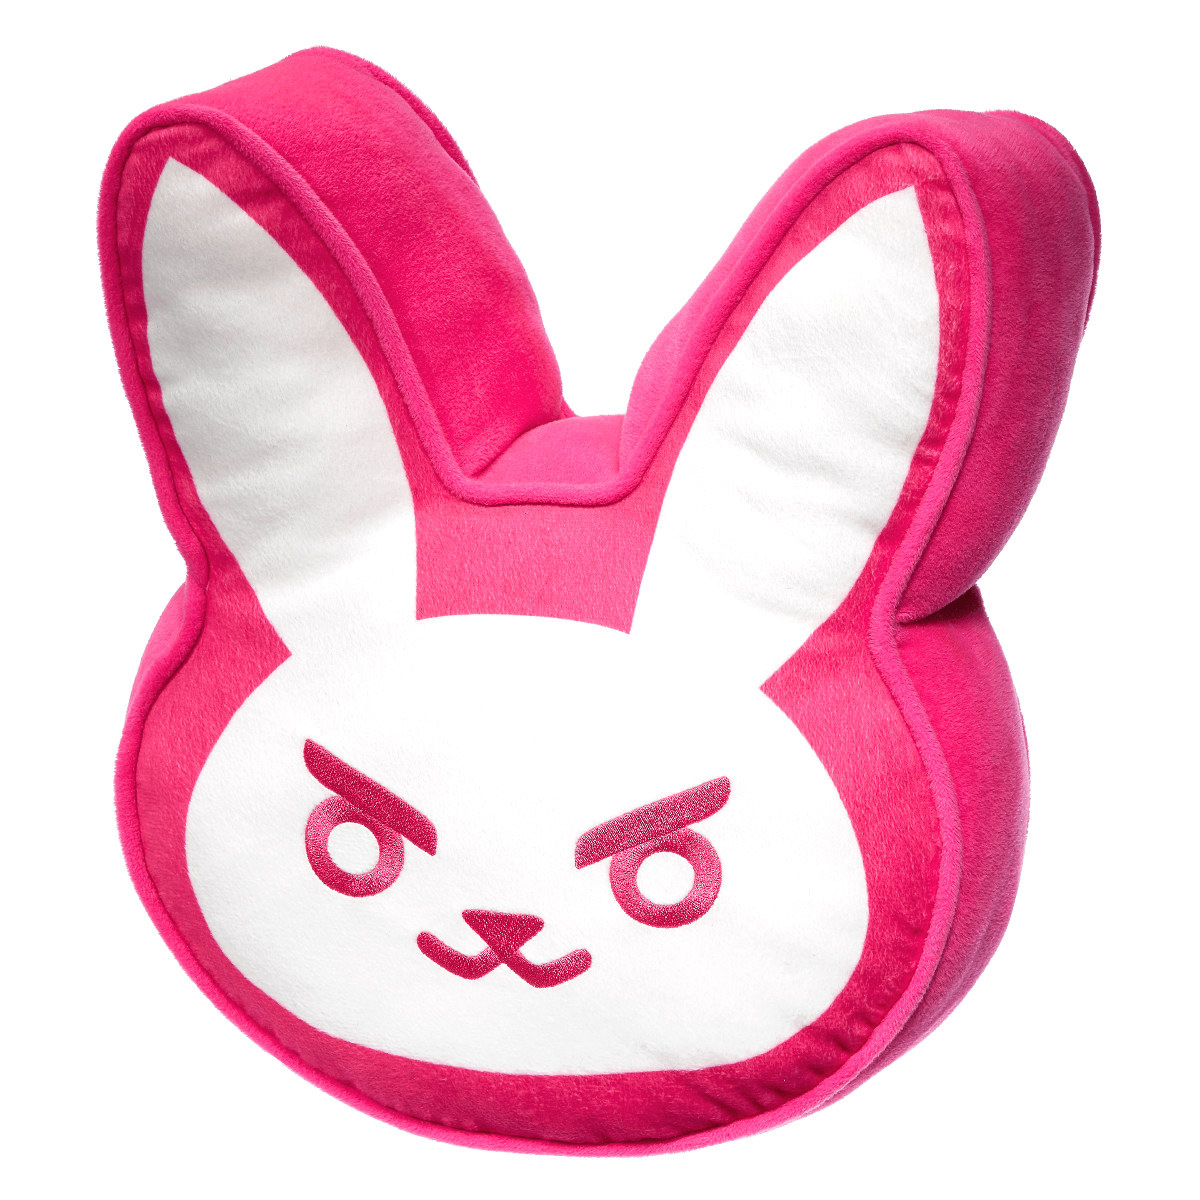 bunny pillows for sale